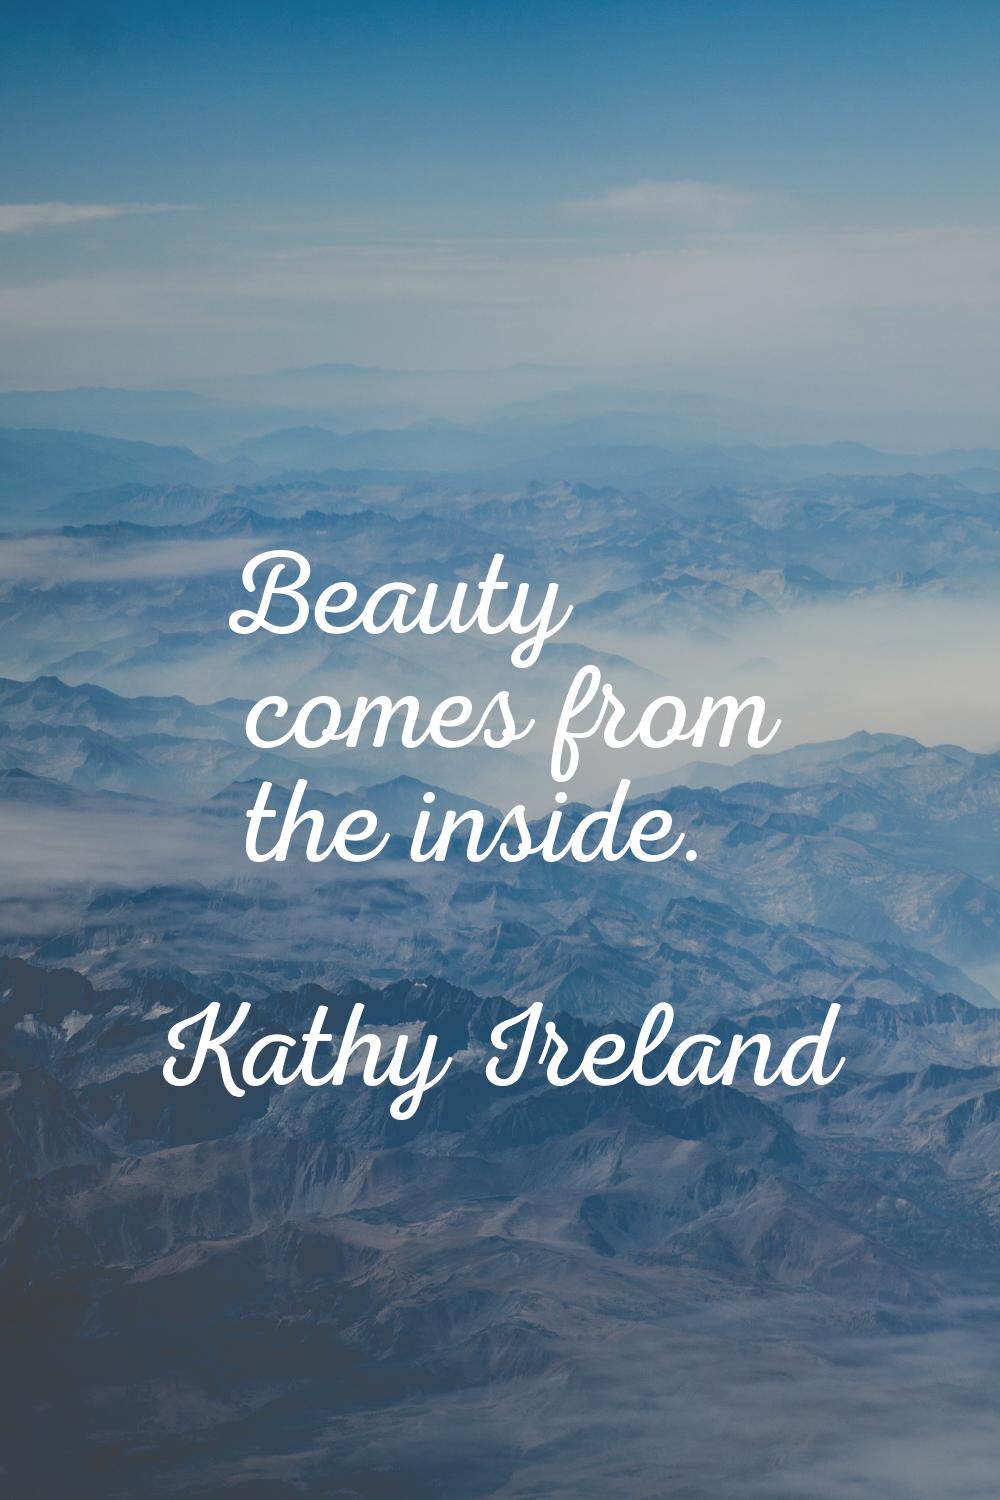 Beauty comes from the inside.